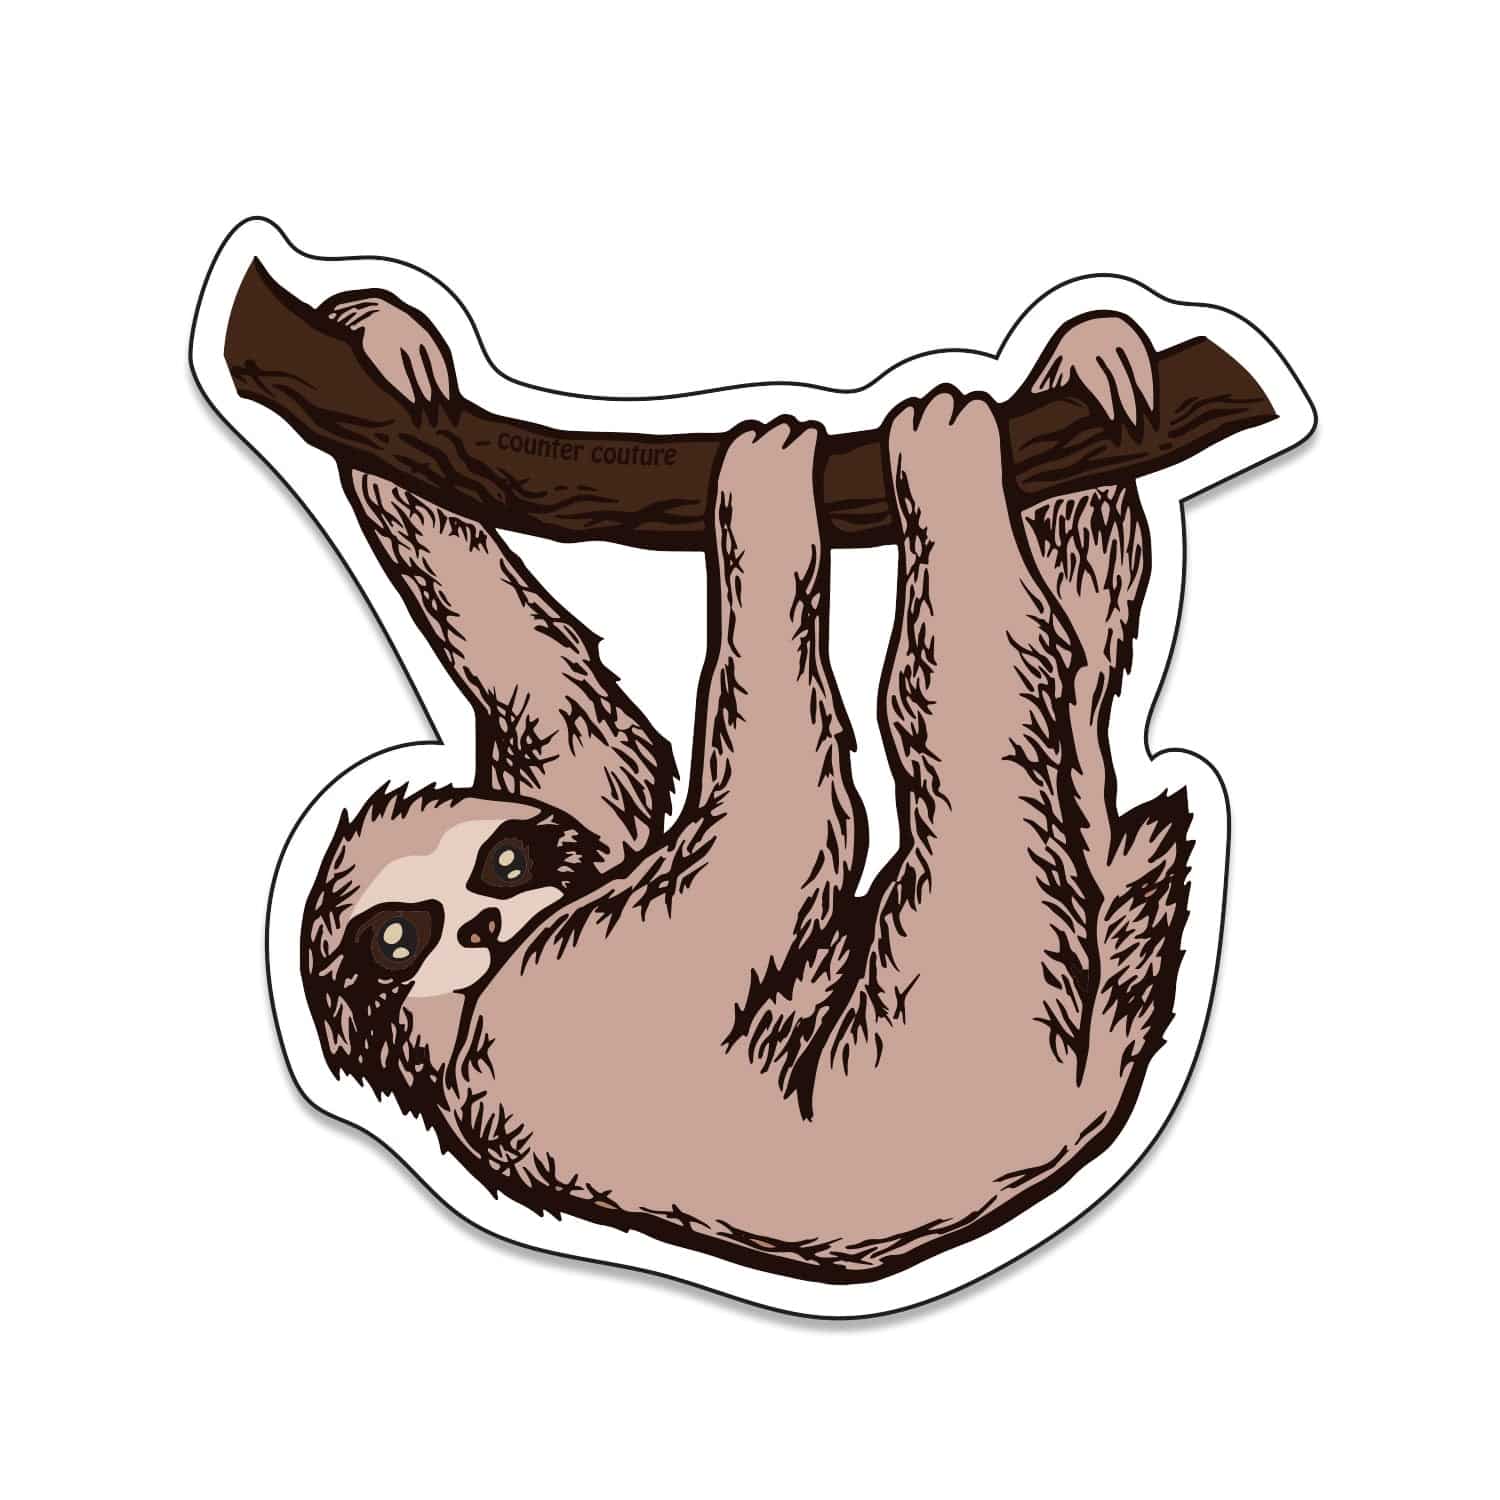 Sloth Die Cut Sticker - Counter Couture